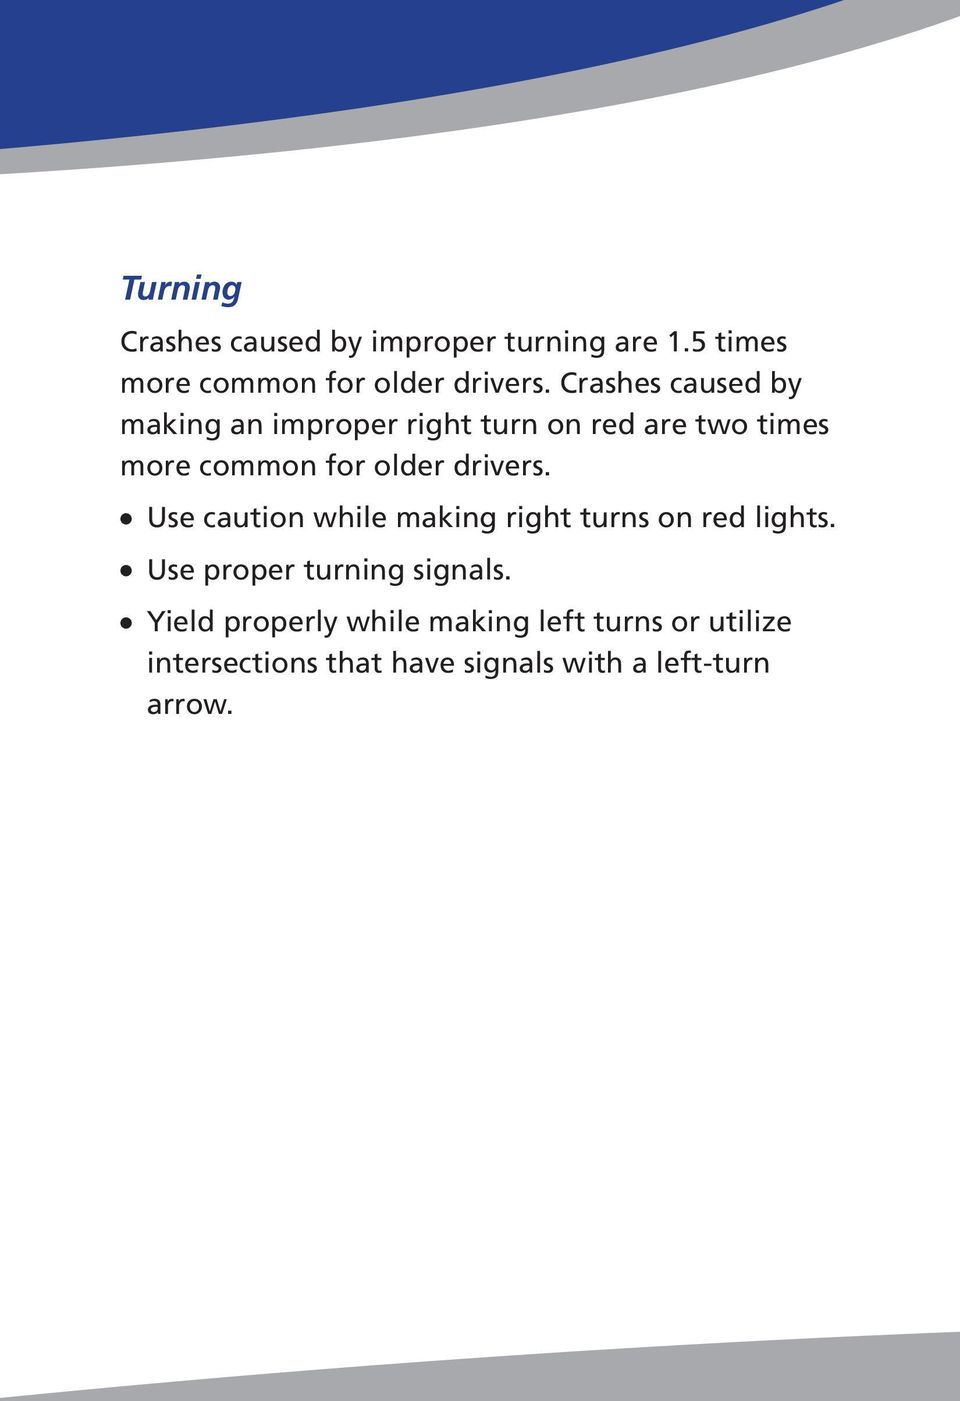 drivers. l Use caution while making right turns on red lights. l Use proper turning signals.